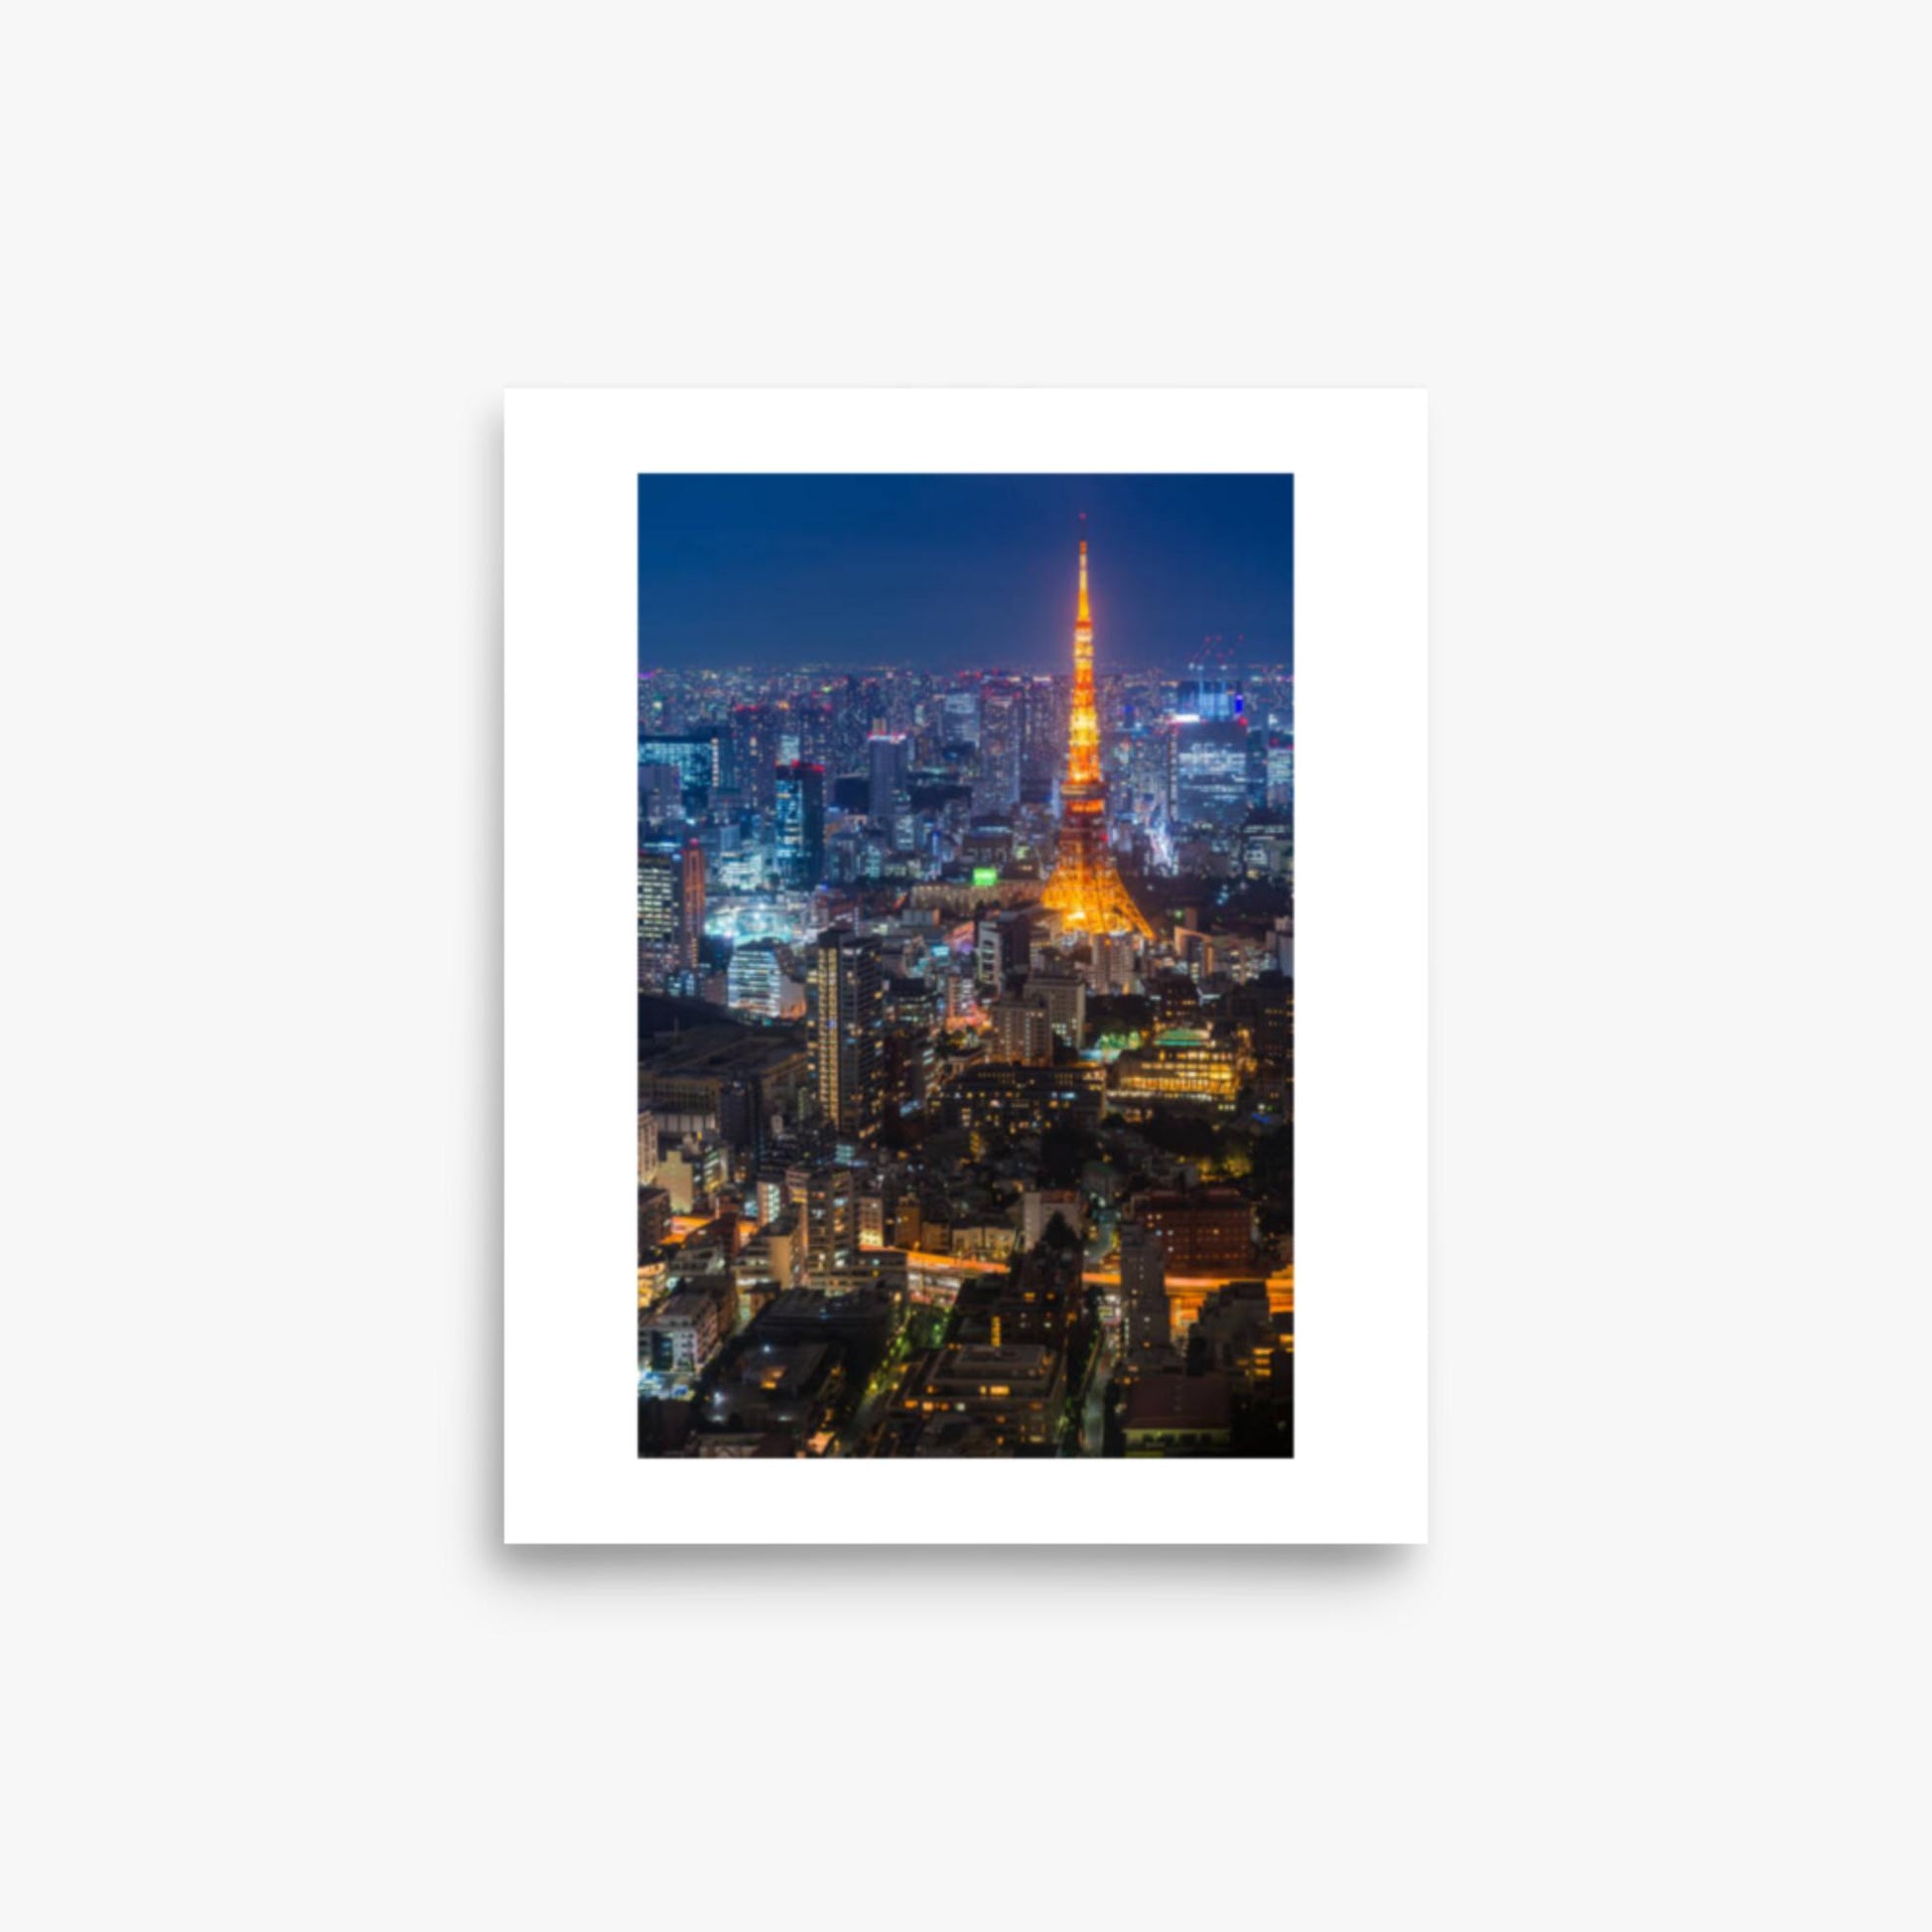 Tokyo Tower illuminated 8x10 in Poster